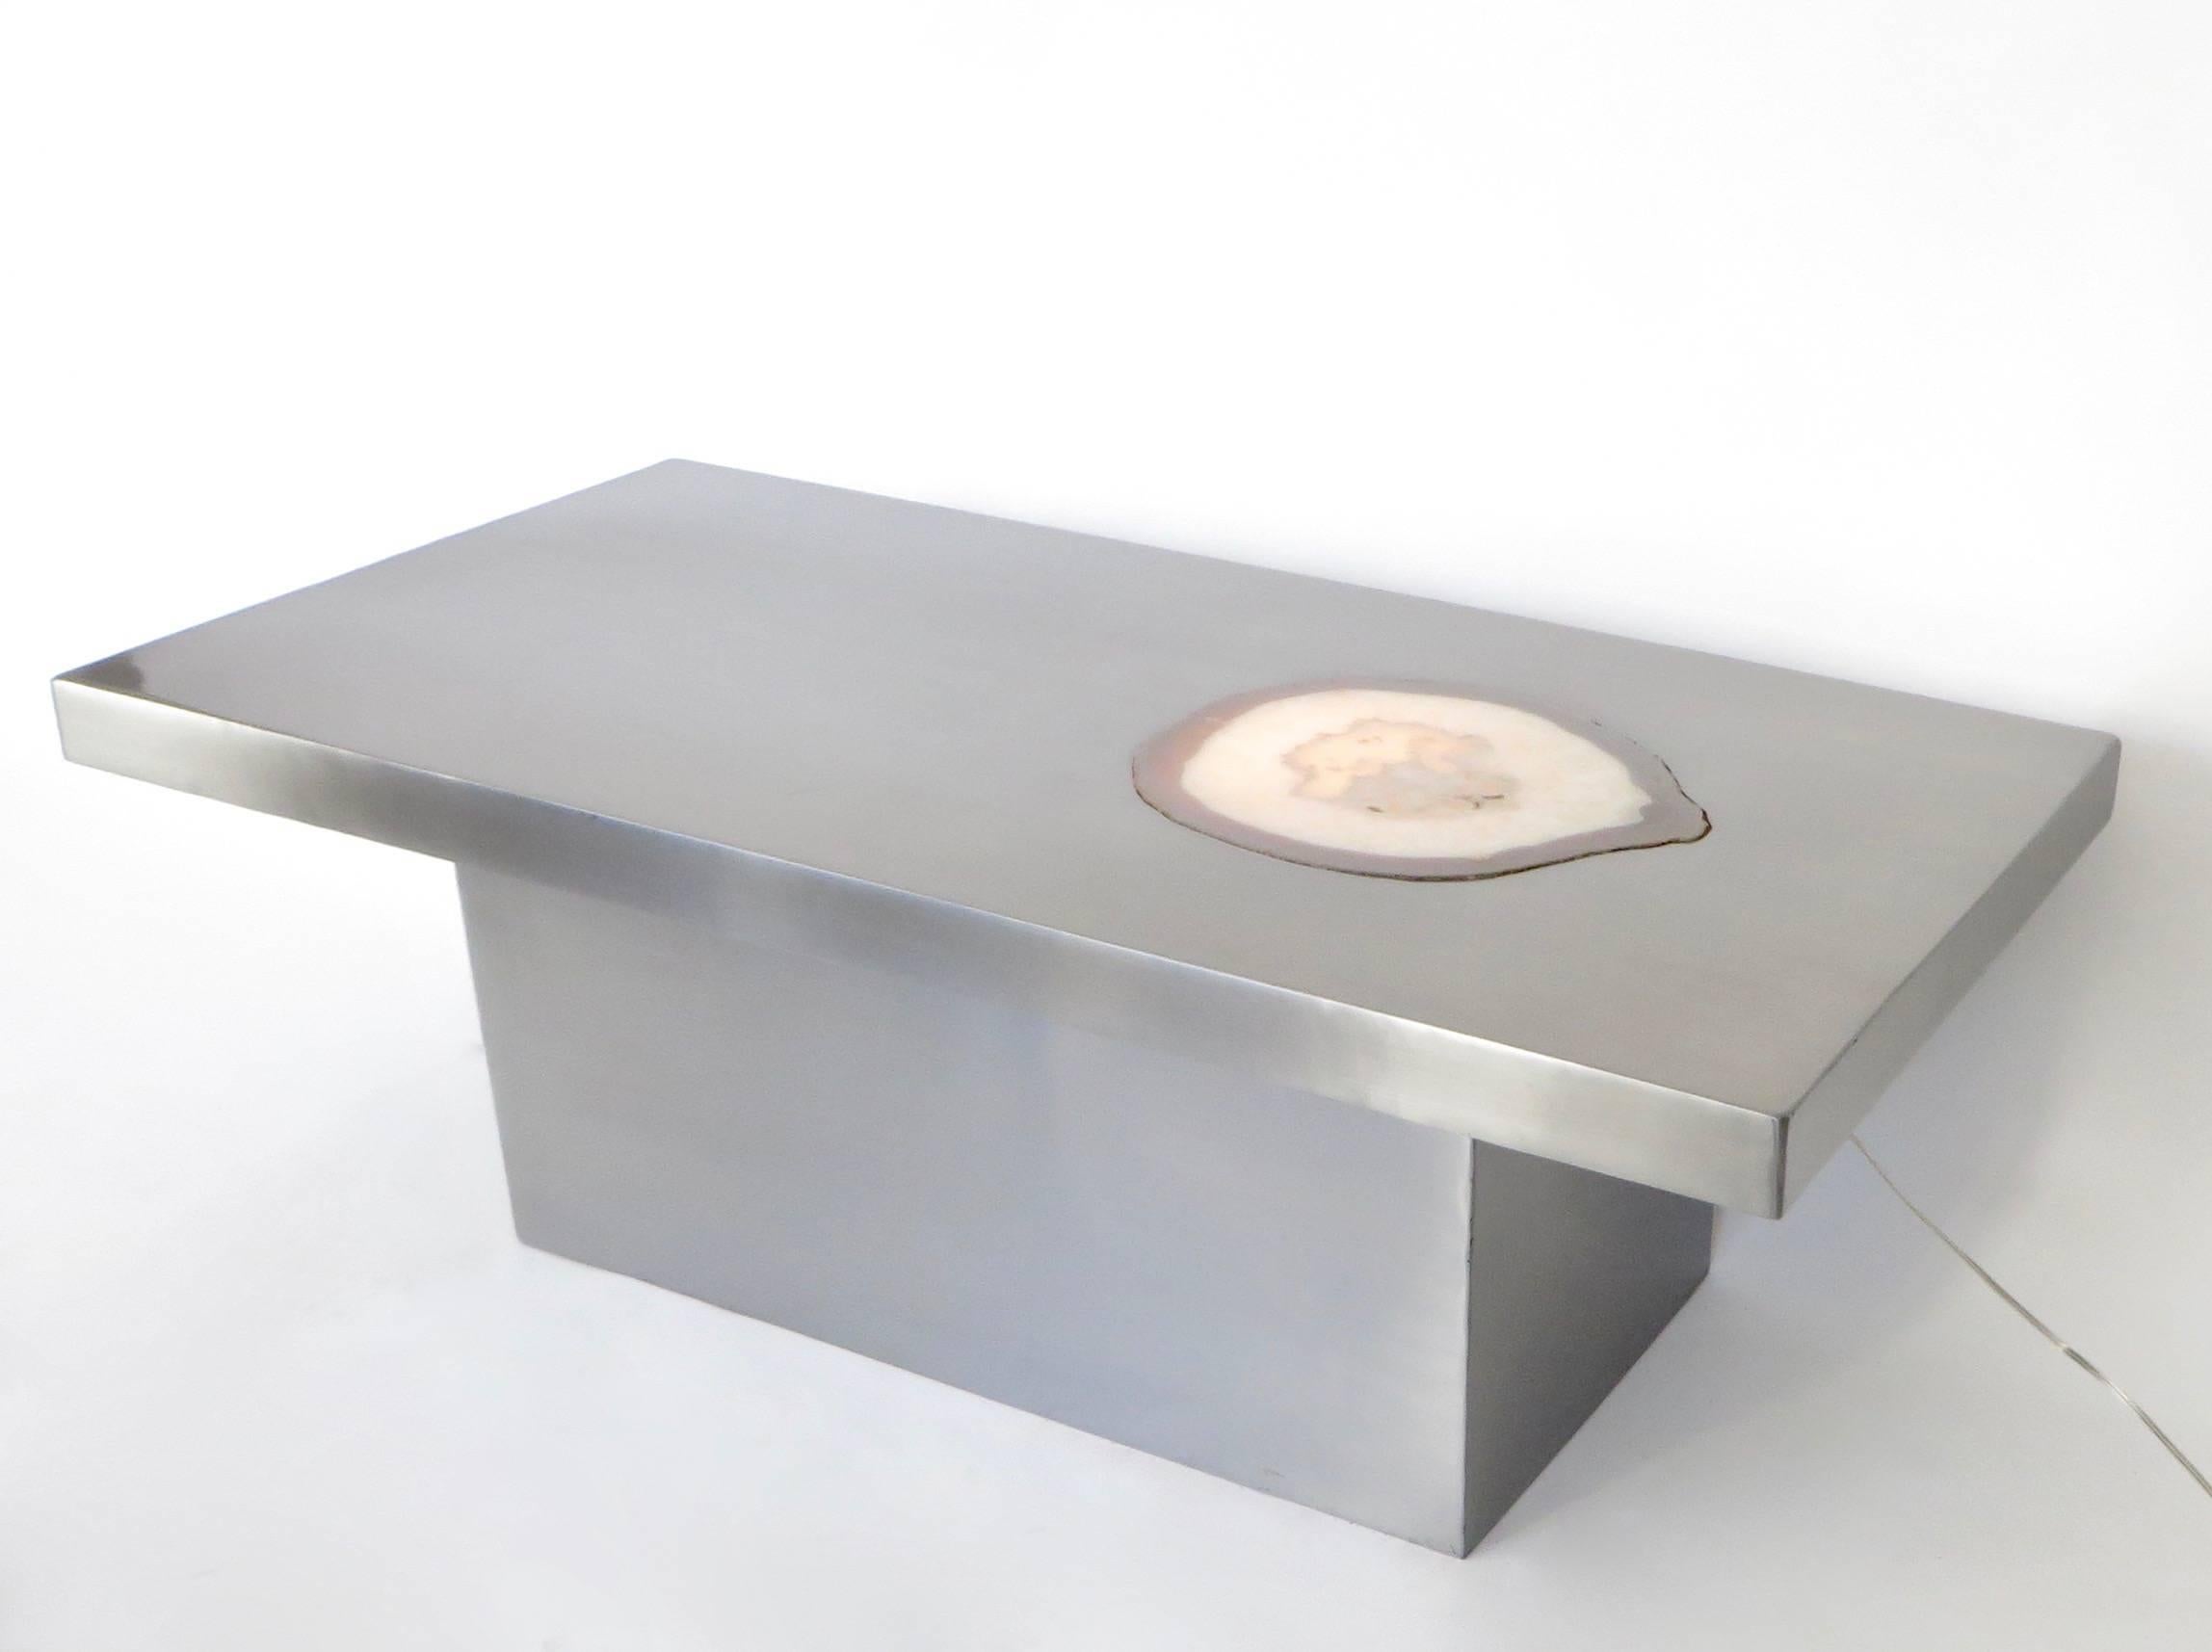 French Stainless Steel Inlaid Agate Coffee Table with Illumination from below 4